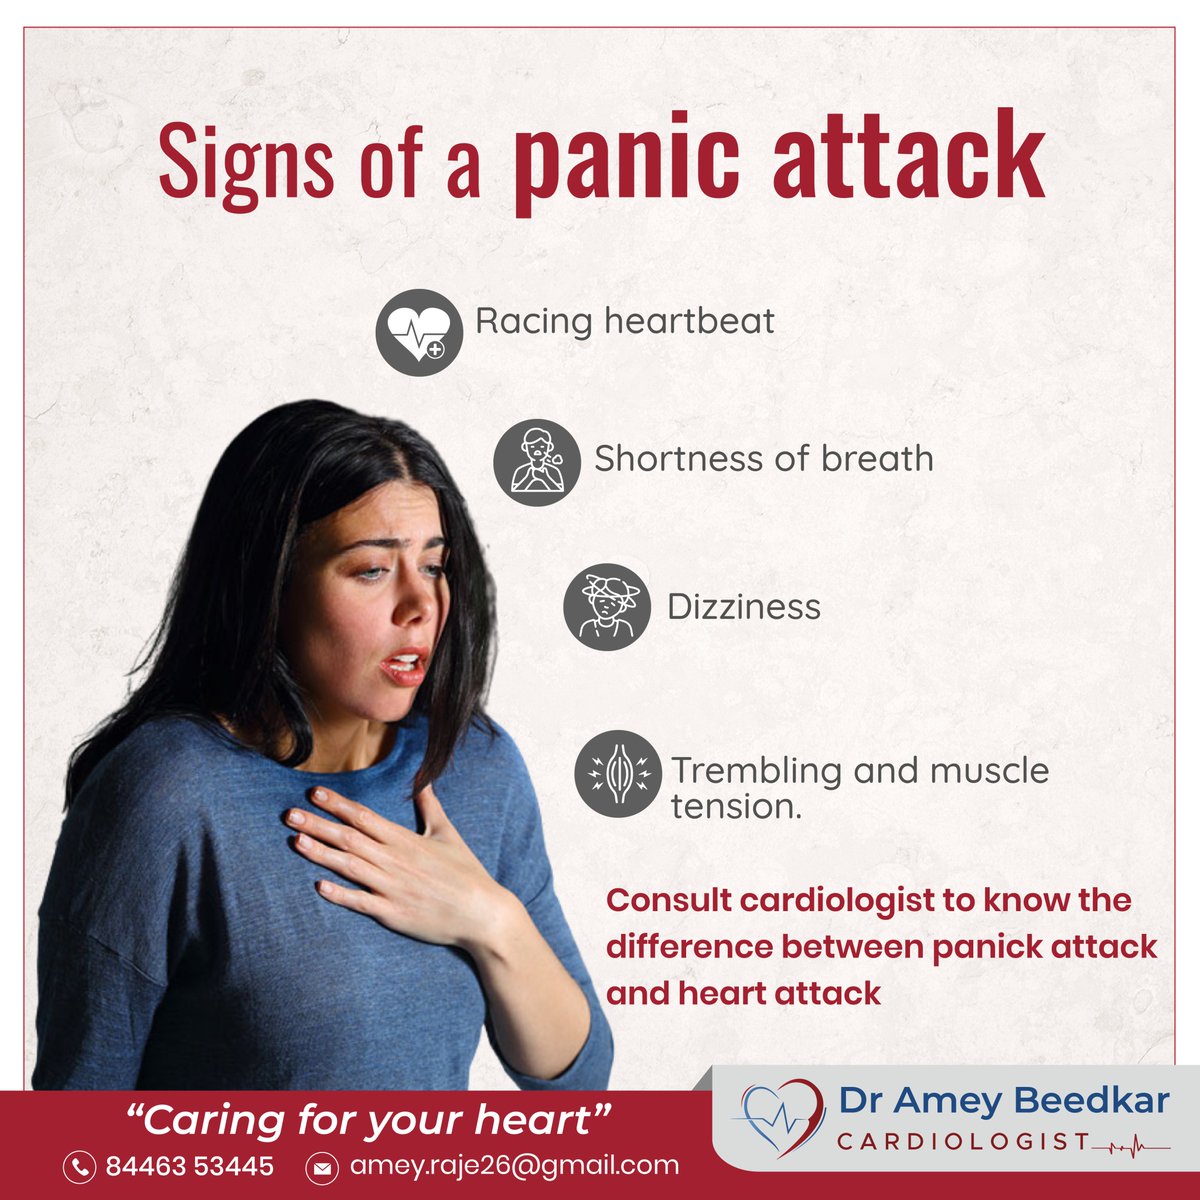 Signs of a panic attack

#hearthealth #heart #heartattack #doctor #cardiologist #heartdiseaseawareness  #cardiology #cardiologist #cardiologyclinic #cardiologyfellow #cardiologydepartment #cardiologyfellowship  #signsofpanicattack #panicattack #panicattackhelp #PanicAttackRelief